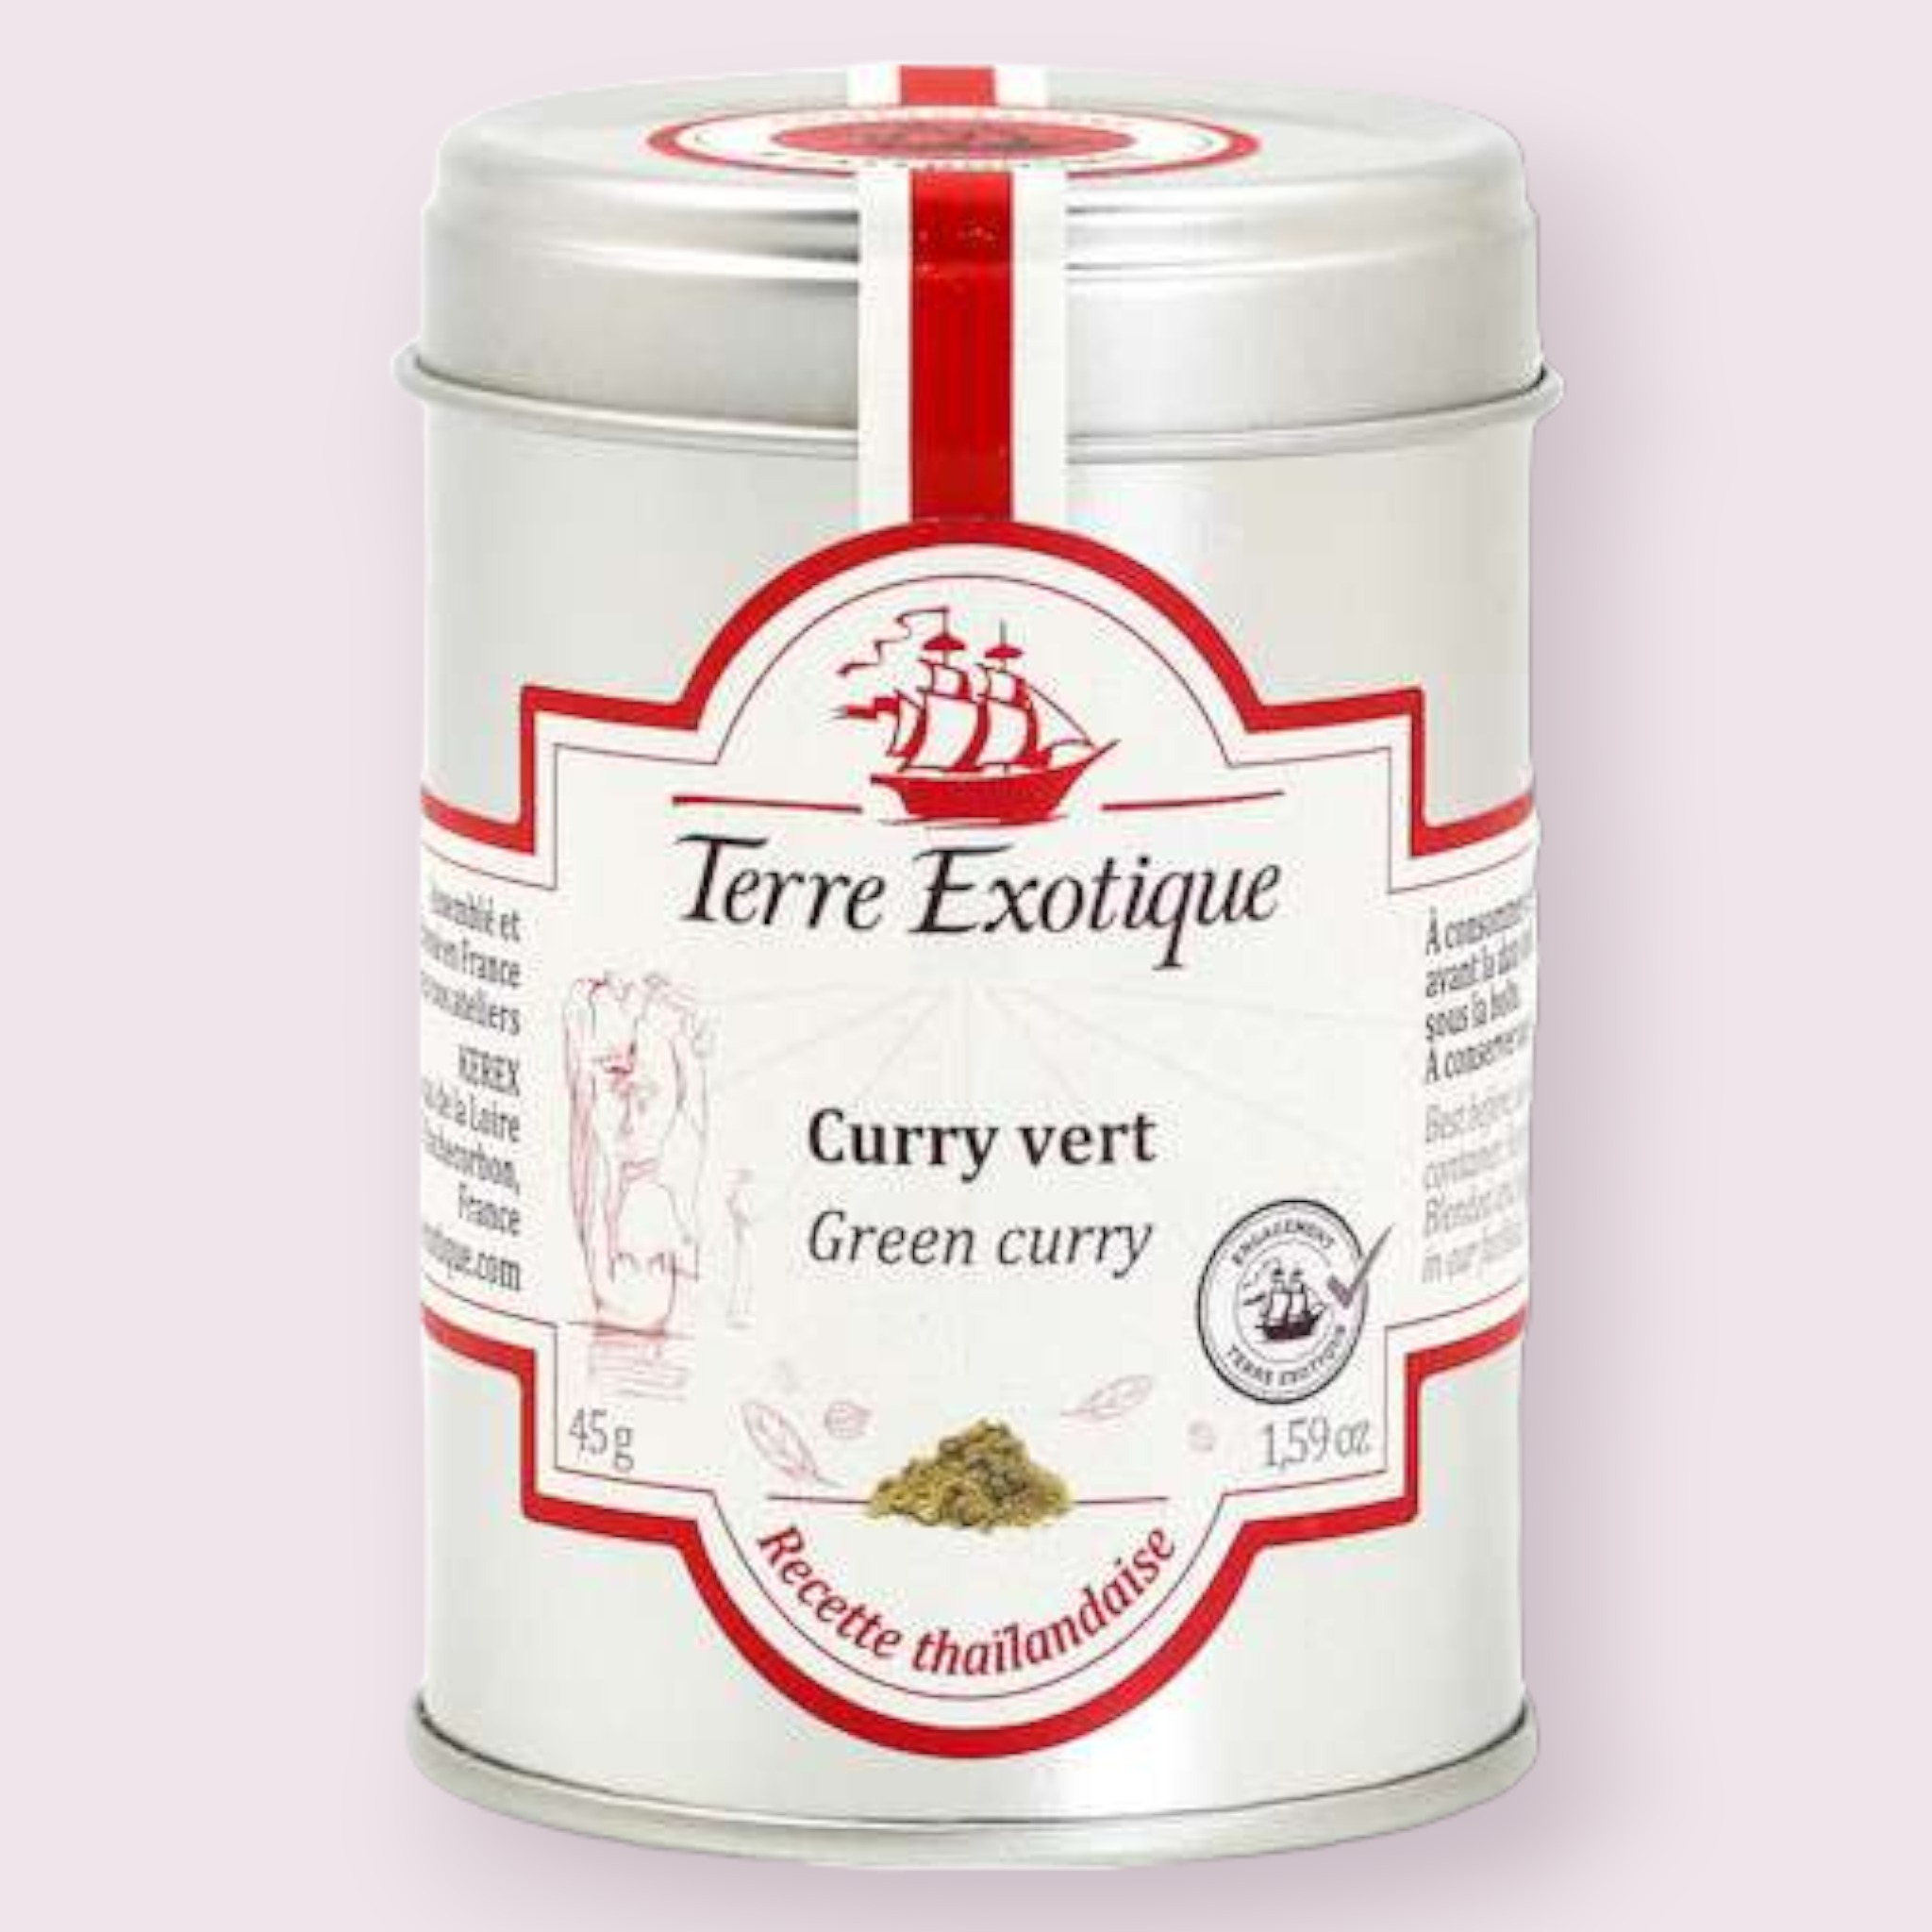 Curry vert - Terre Exotique